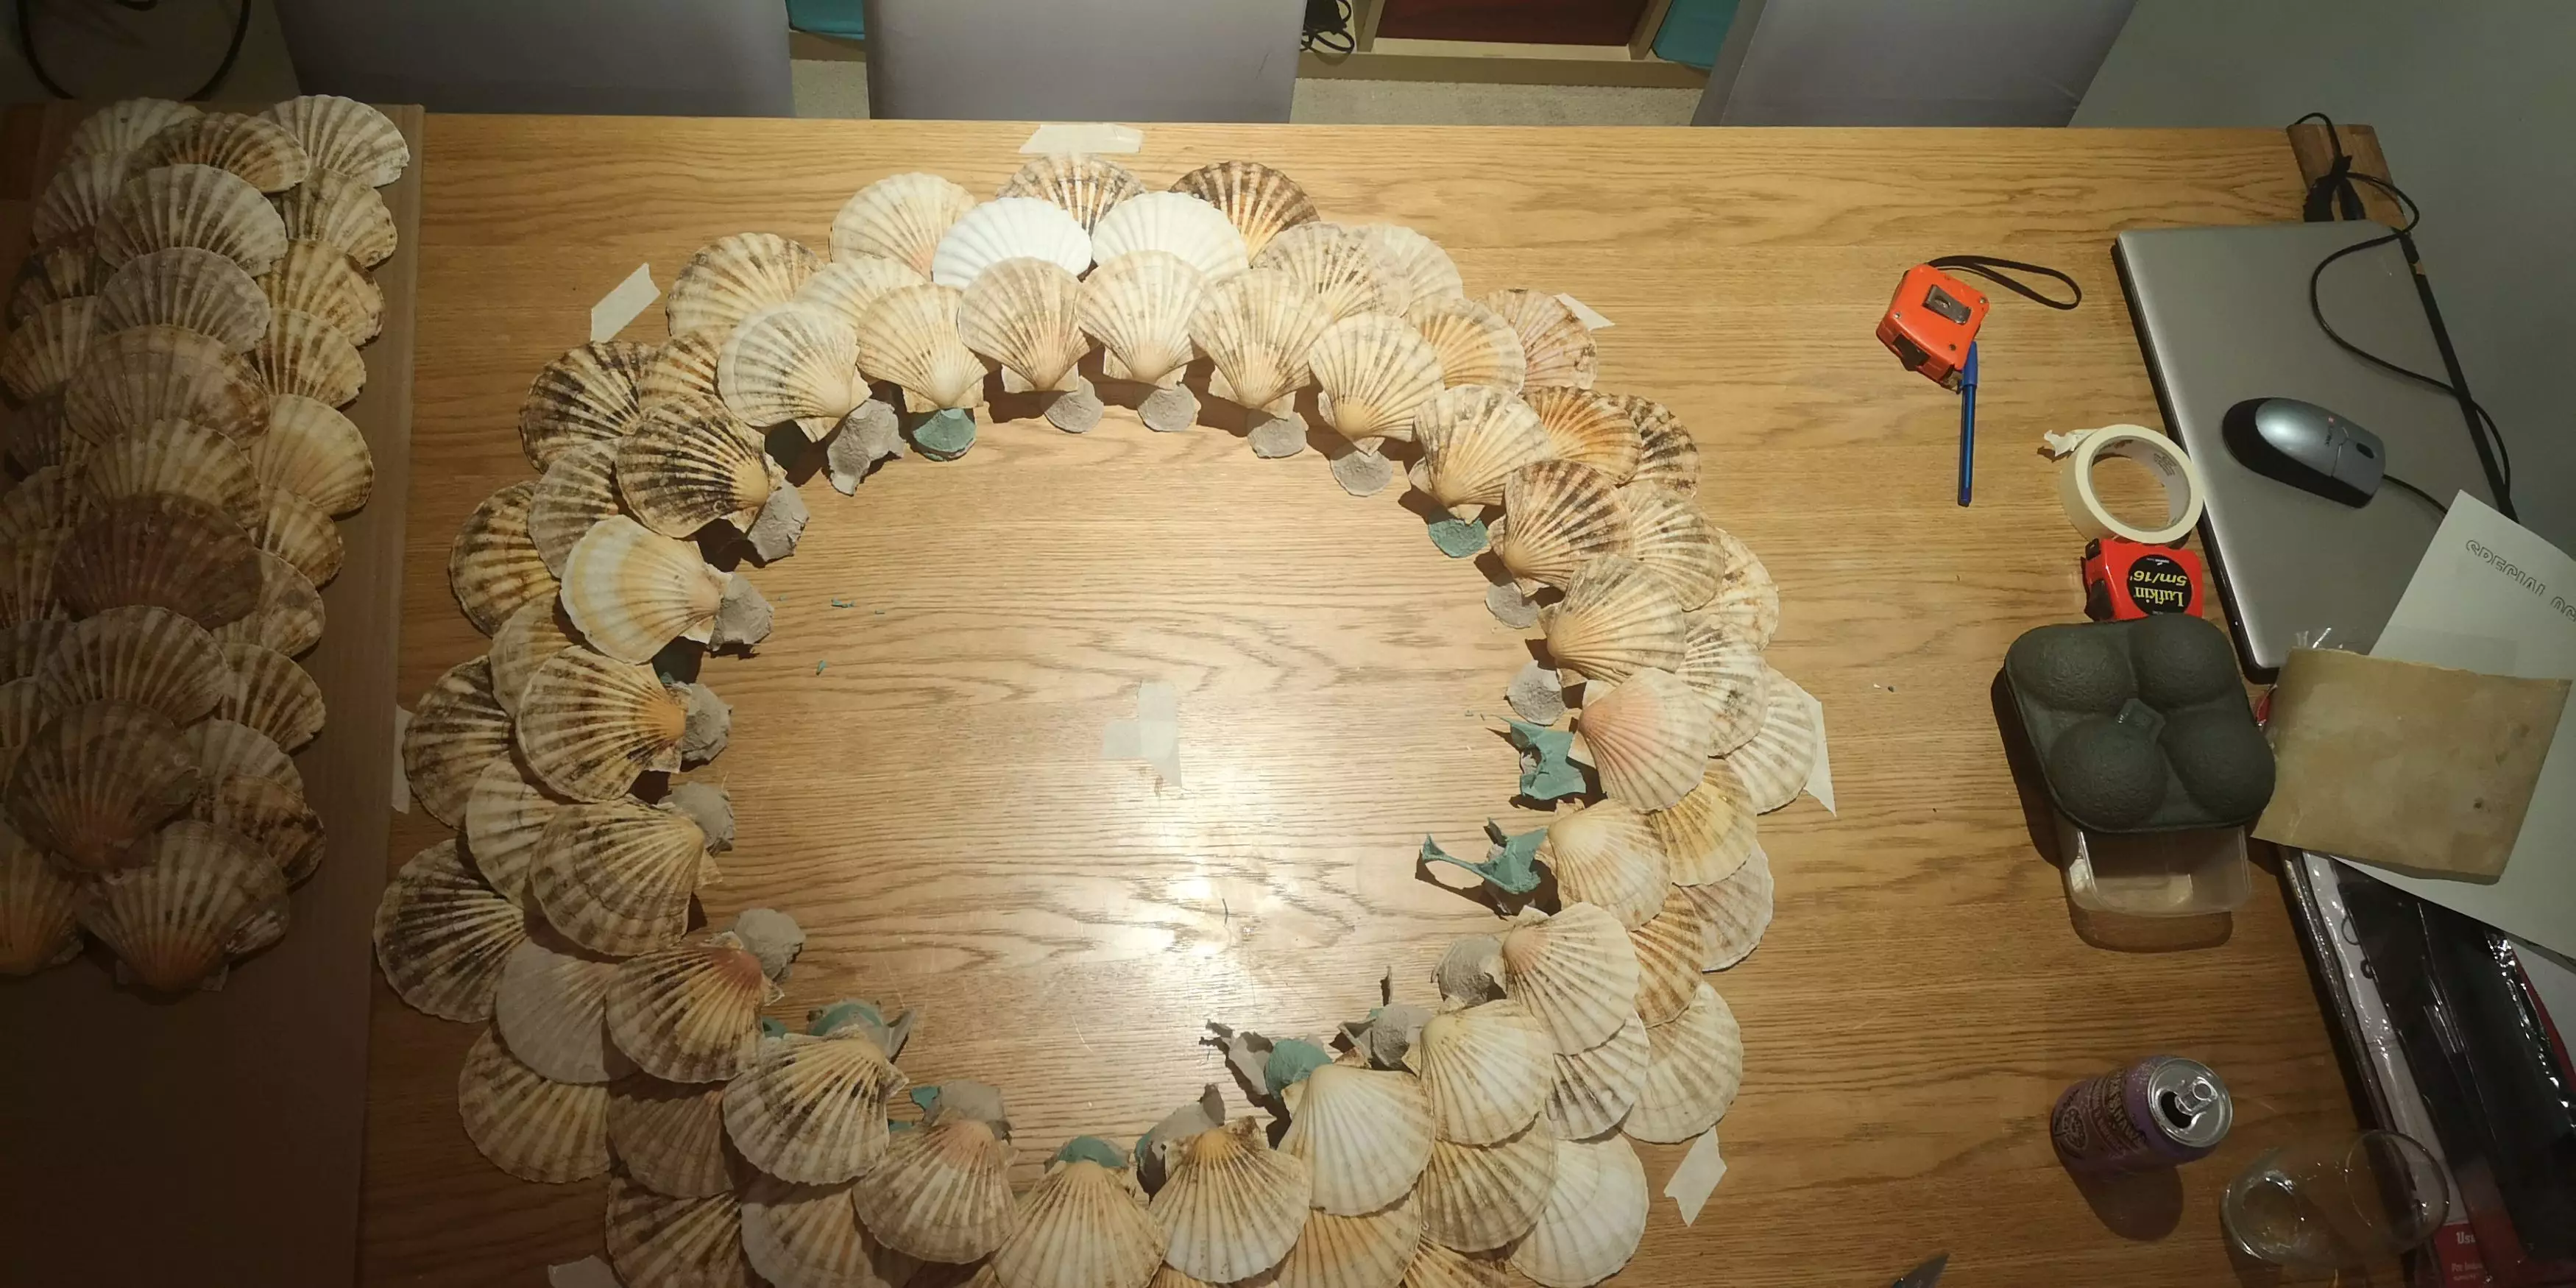 Lisa used a glue gun to stick the shells to the to three circular tiers (